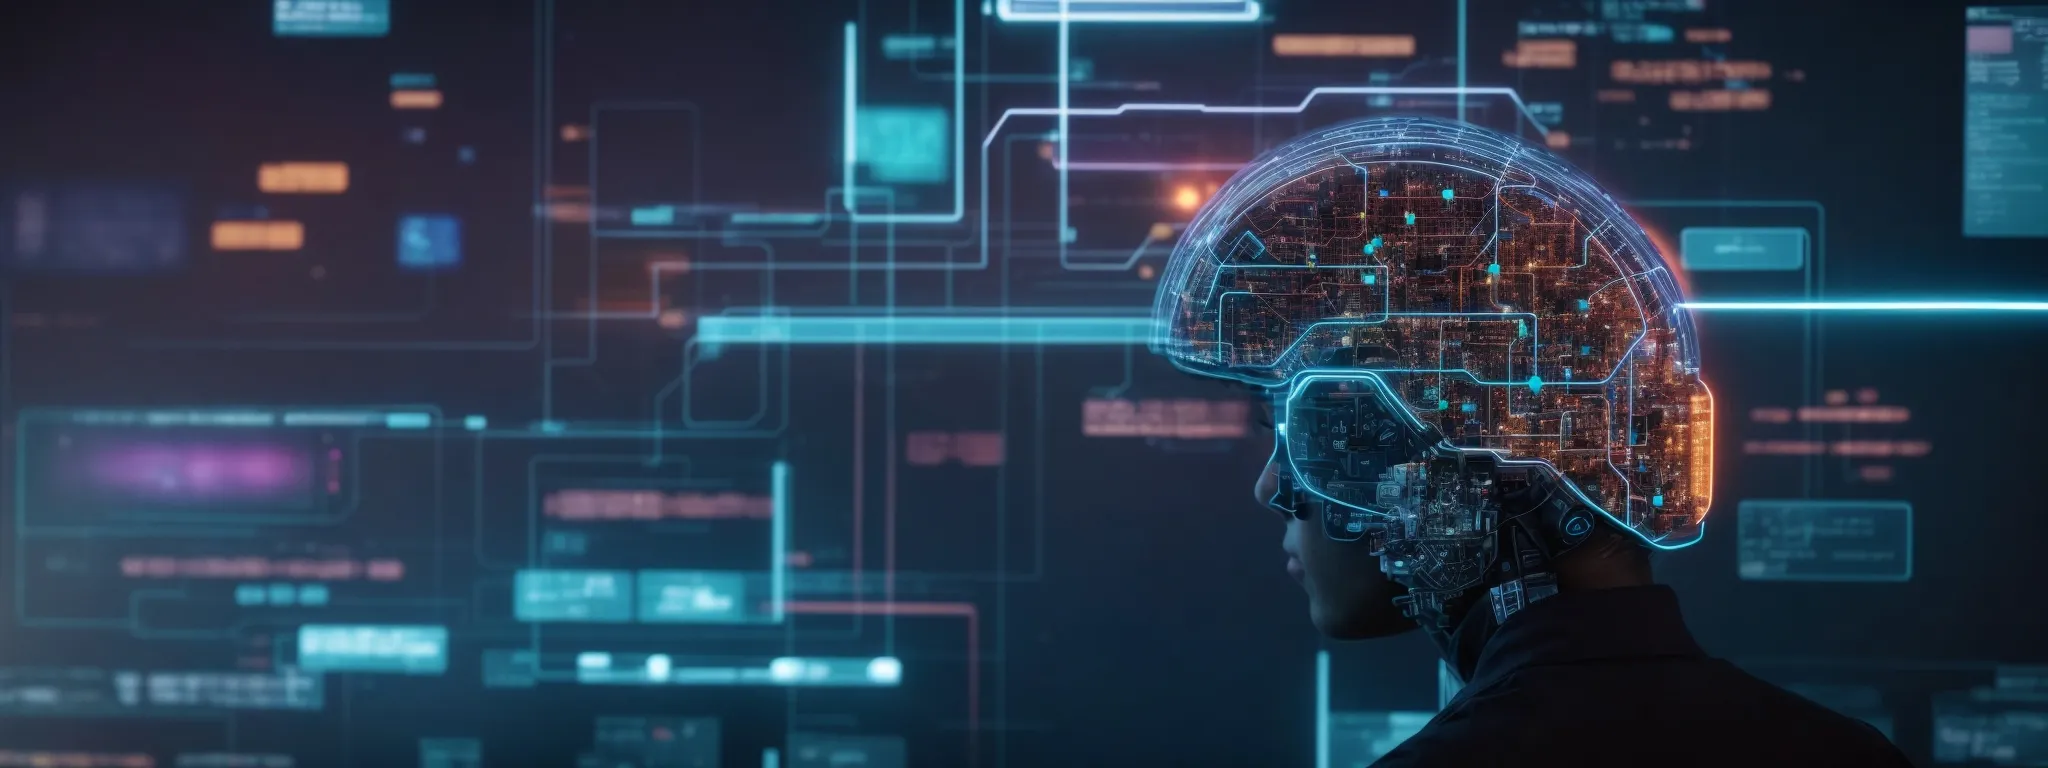 a futuristic ai brain interface mapping out consumer preferences on a holographic screen.